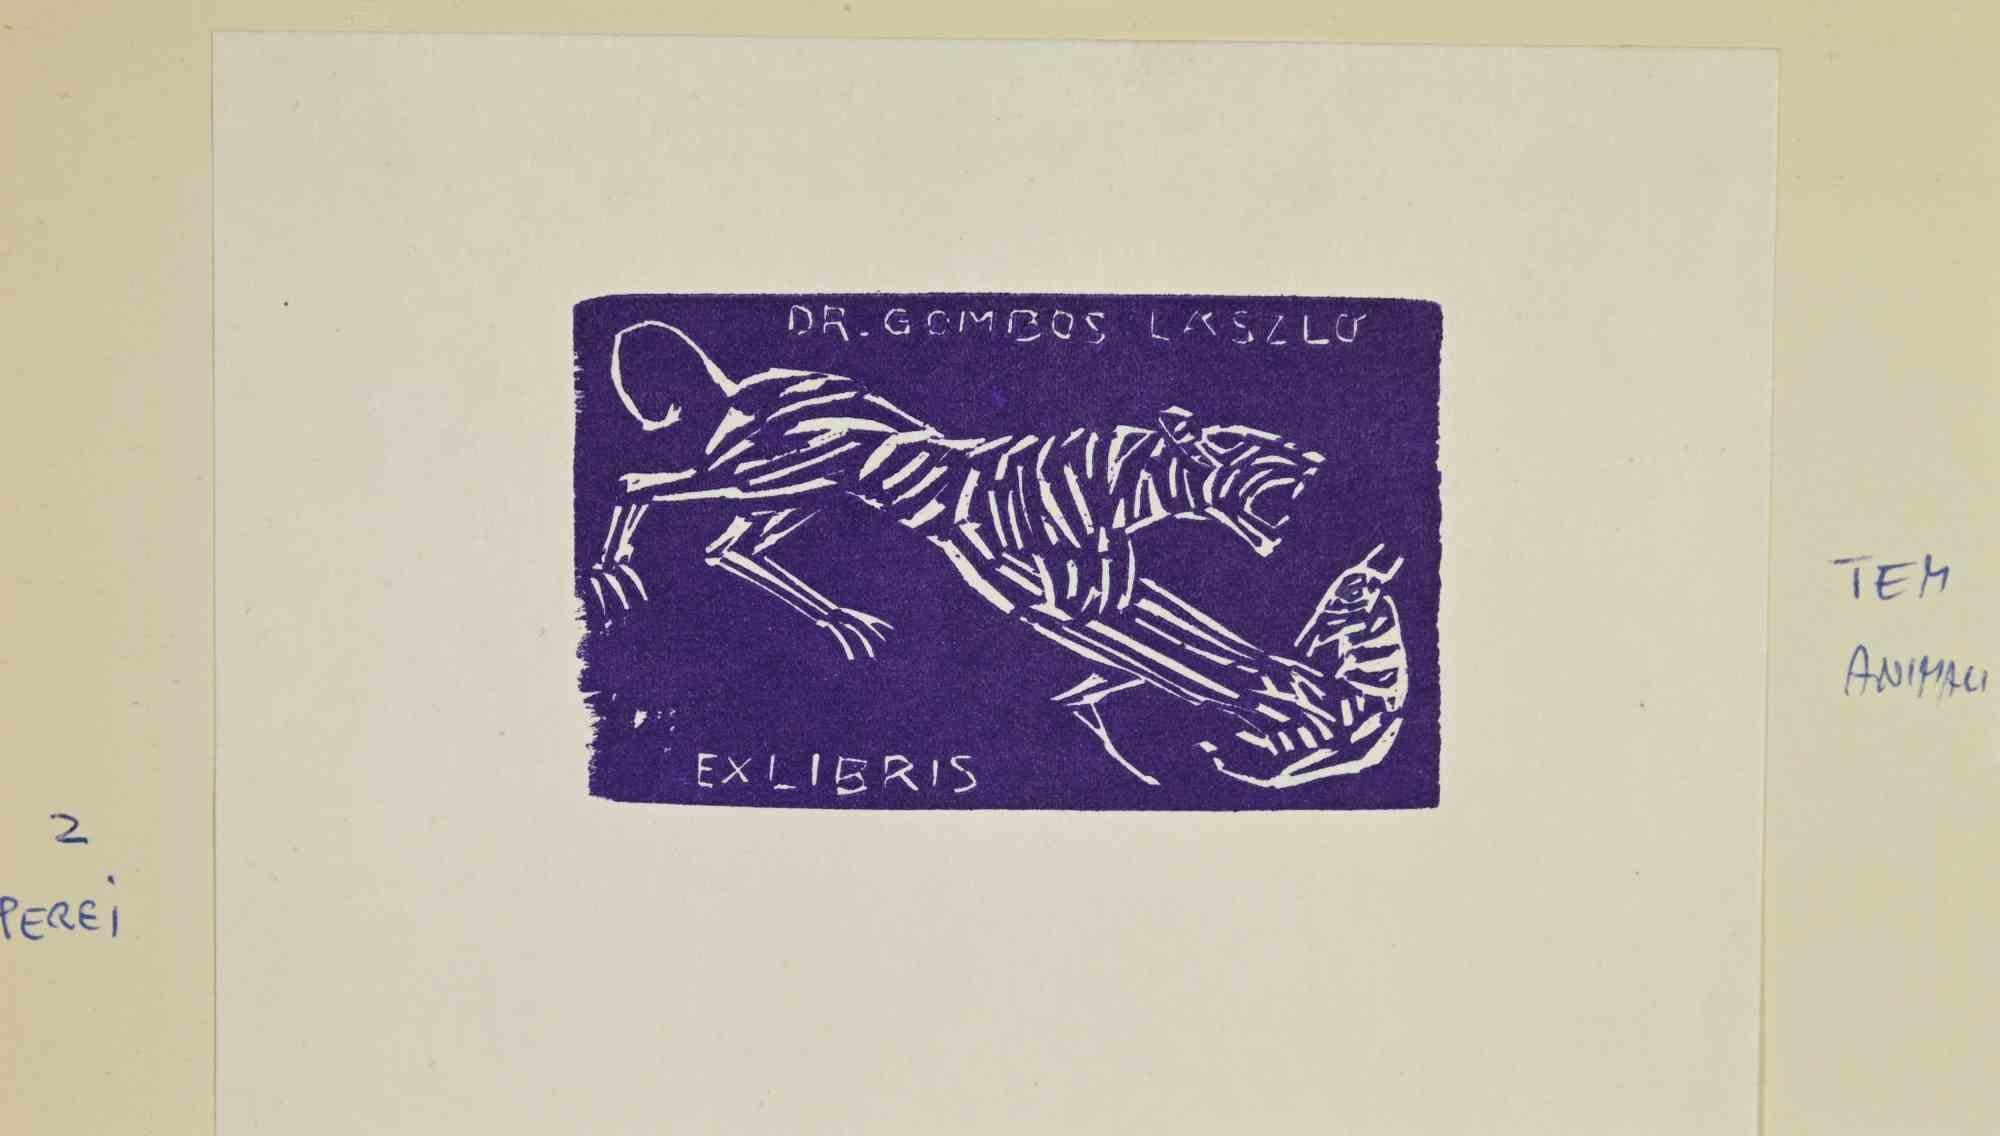  Ex libris - Dr. Gombos Laszlo is an Artwork realized in 1974 by the artist Zoltan Perei, from Hungary.

Woodcut print on ivory paper. The work is glued on ivory cardboard.

Total dimensions: 11x19 cm.

Good conditions.

The artist wants to define a